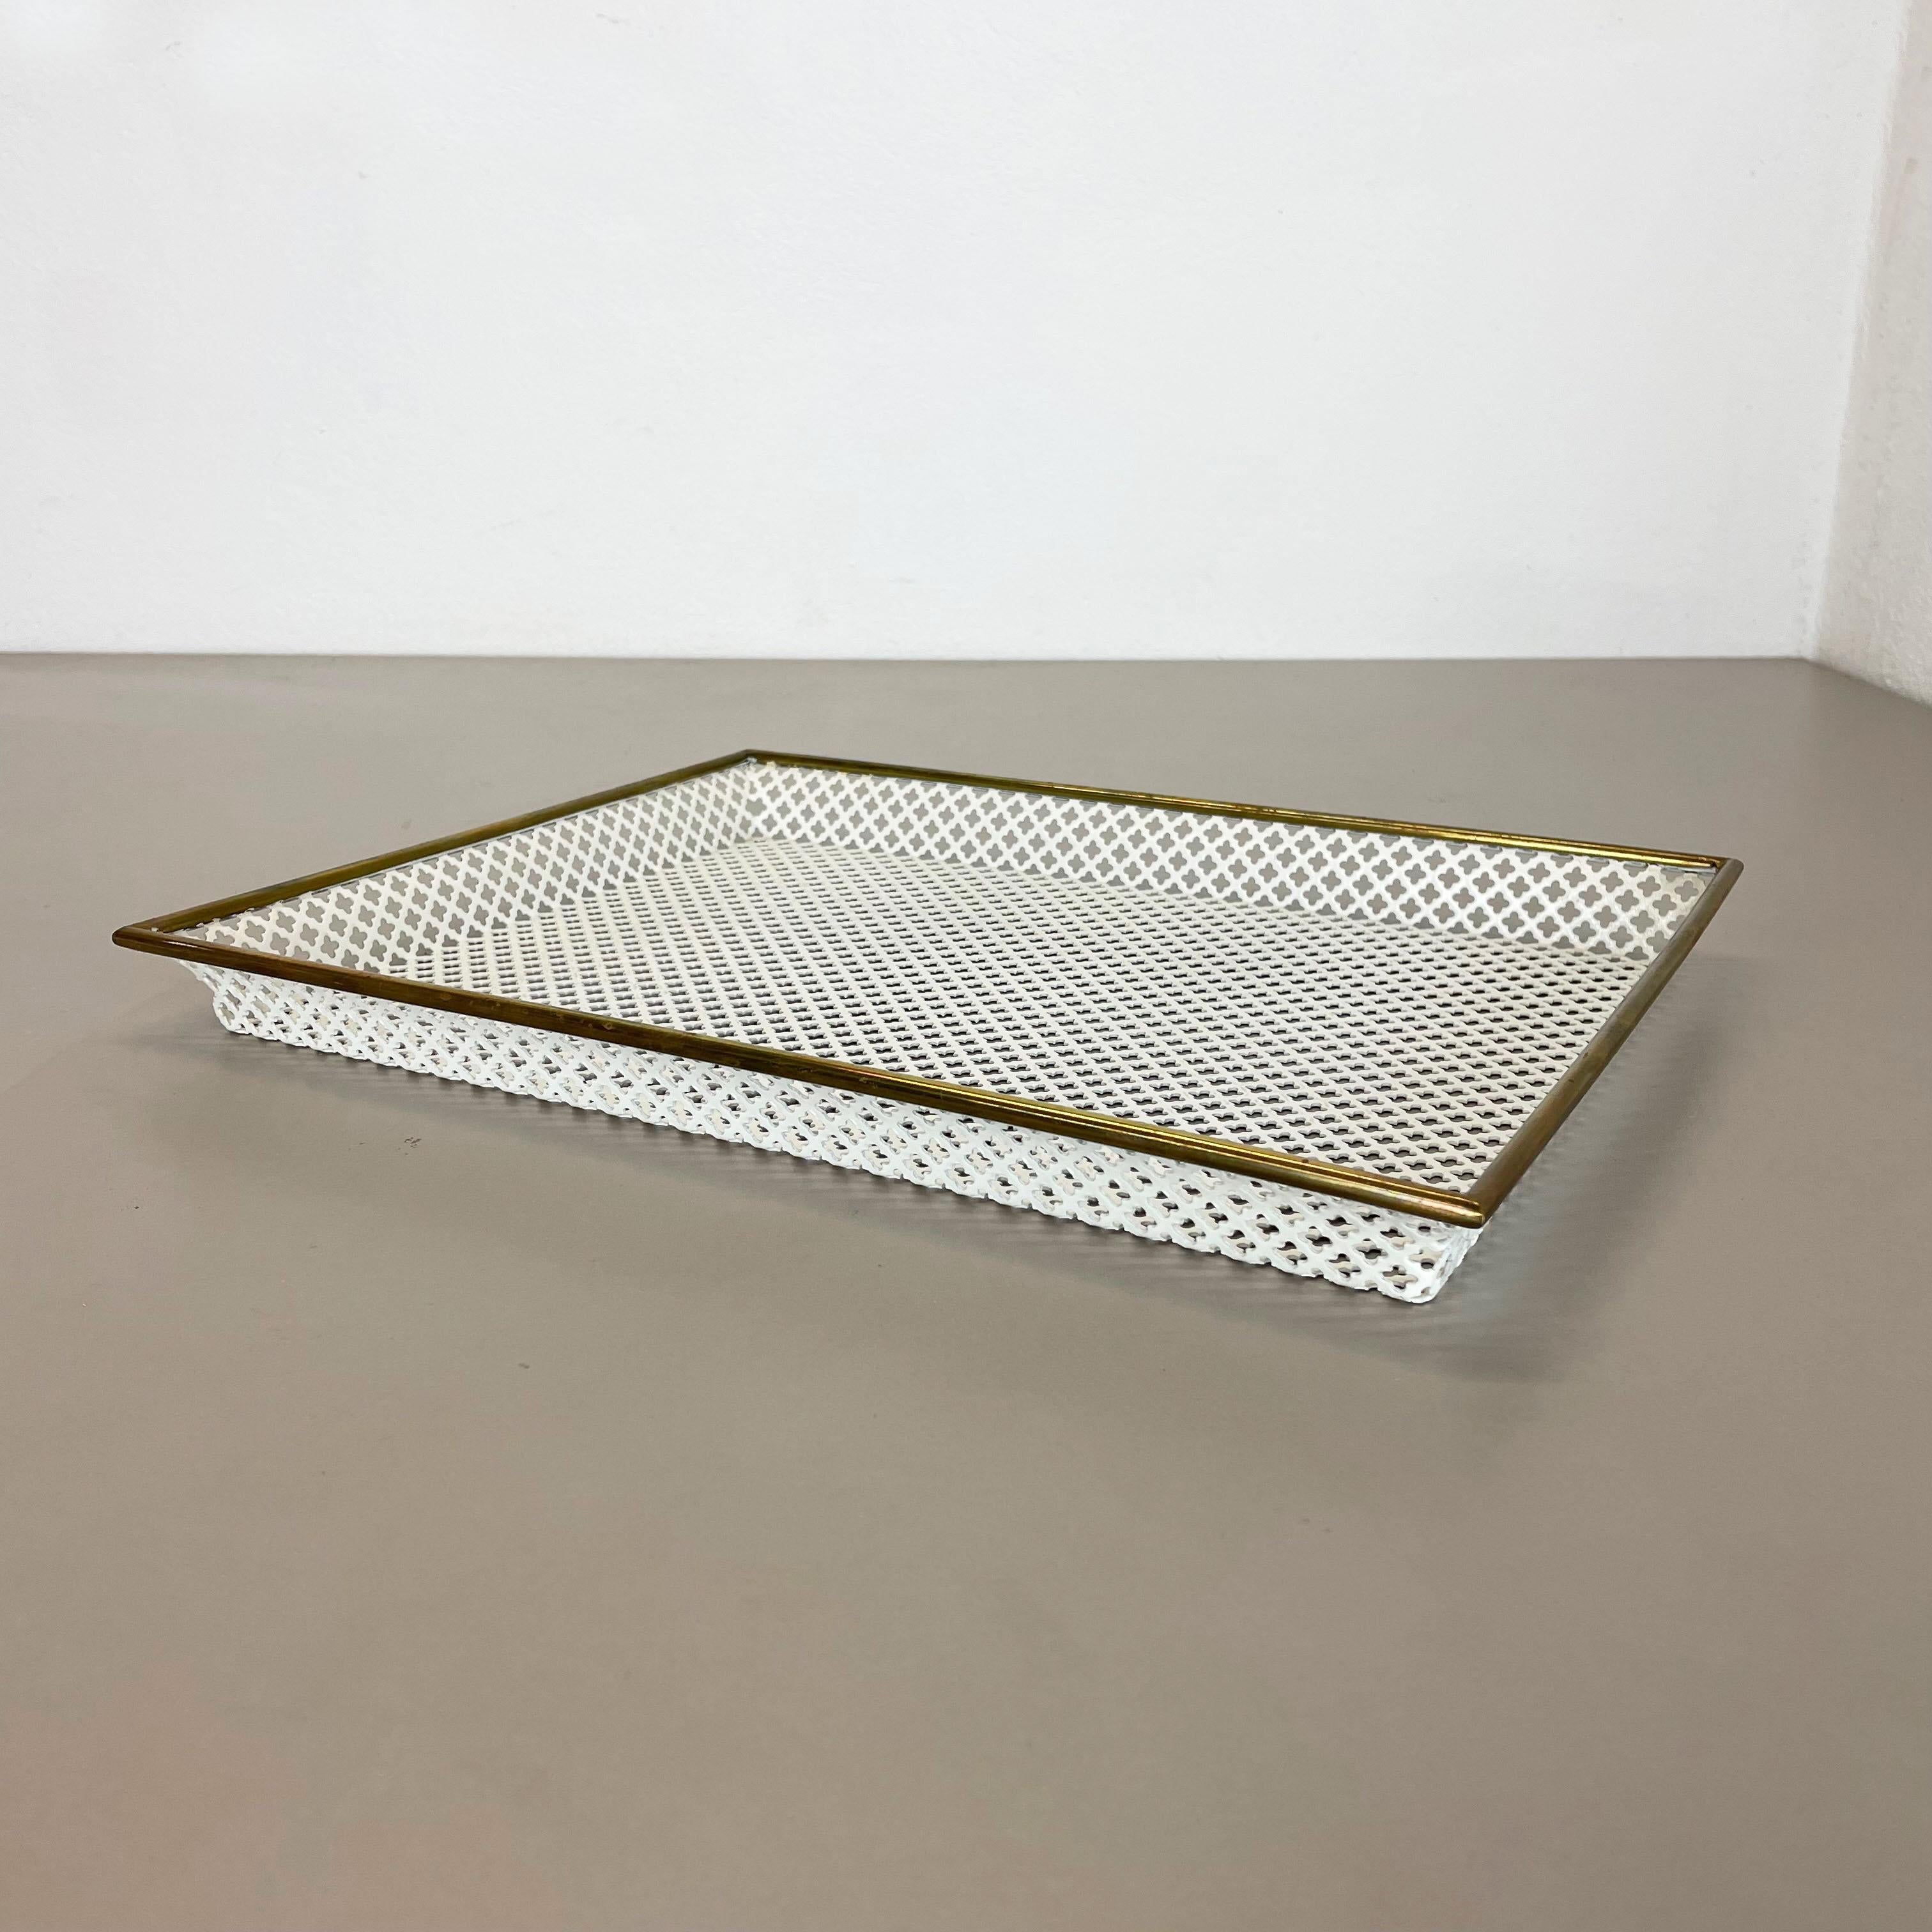 Article:

Tray element with hole pattern


Producer:

Vereinigte Werkstätten München


Origin:

Germany


Material:

metal and brass


Decade:

1950s


Description:

This original midcentury tray element was produced in